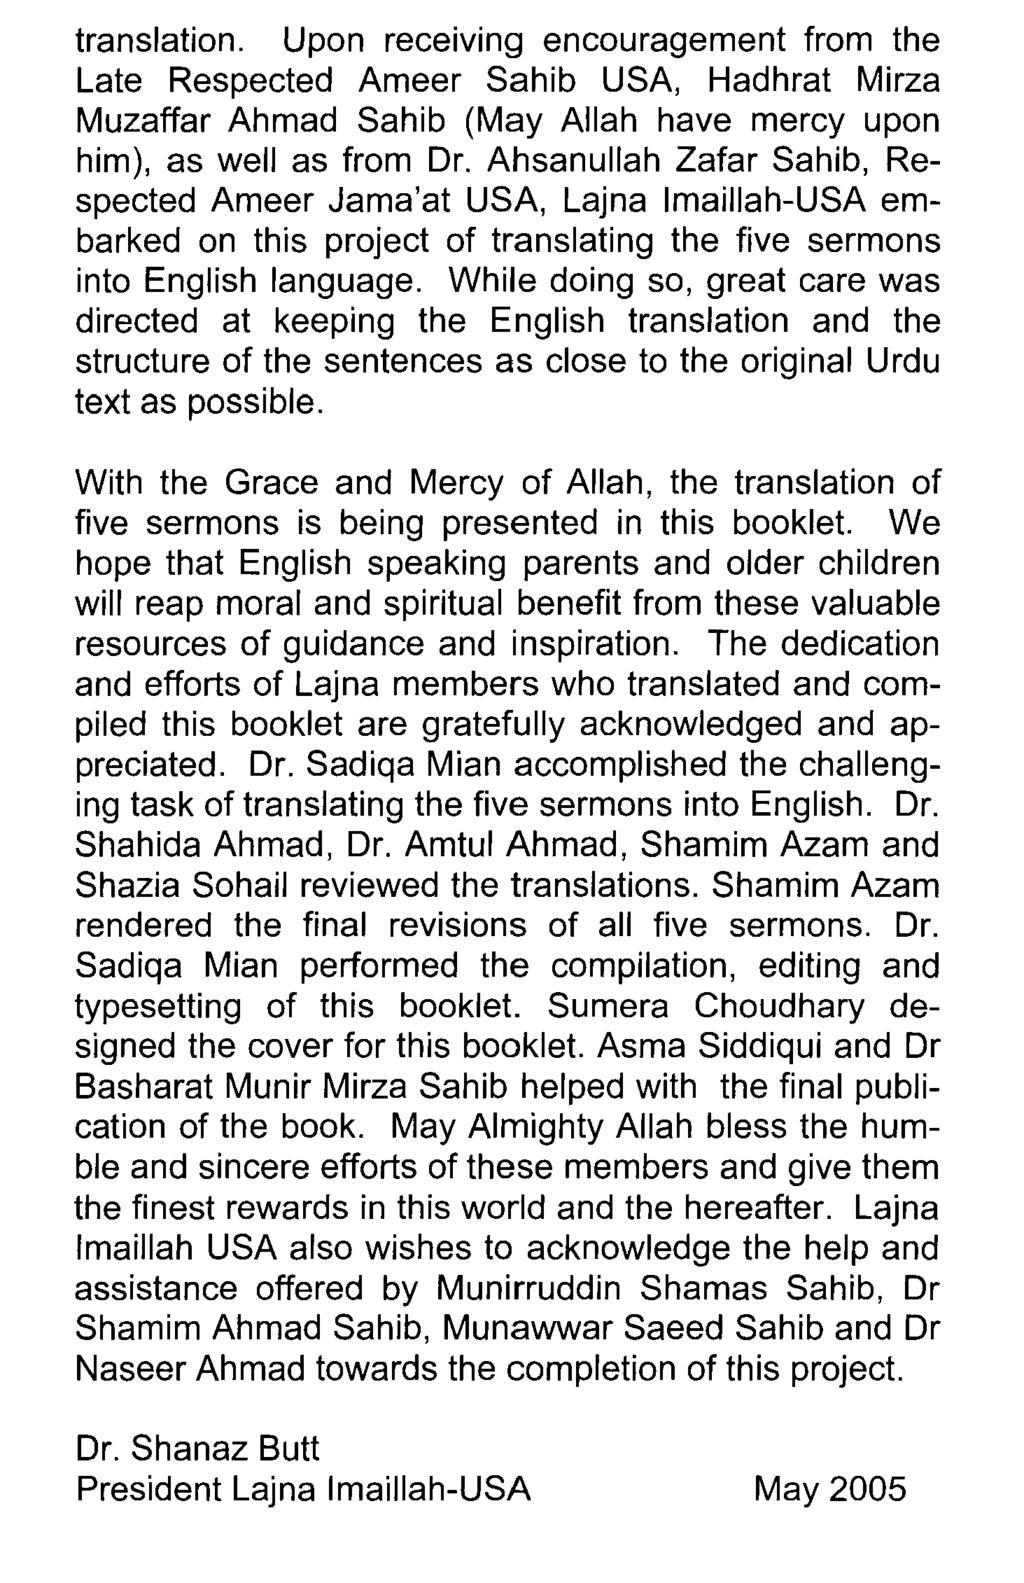 translation. Upon receiving encouragement from the Late Respected Ameer Sahib USA, Hadhrat Mirza Muzaffar Ahmad Sahib (May Allah have mercy upon him), as well as from Dr.